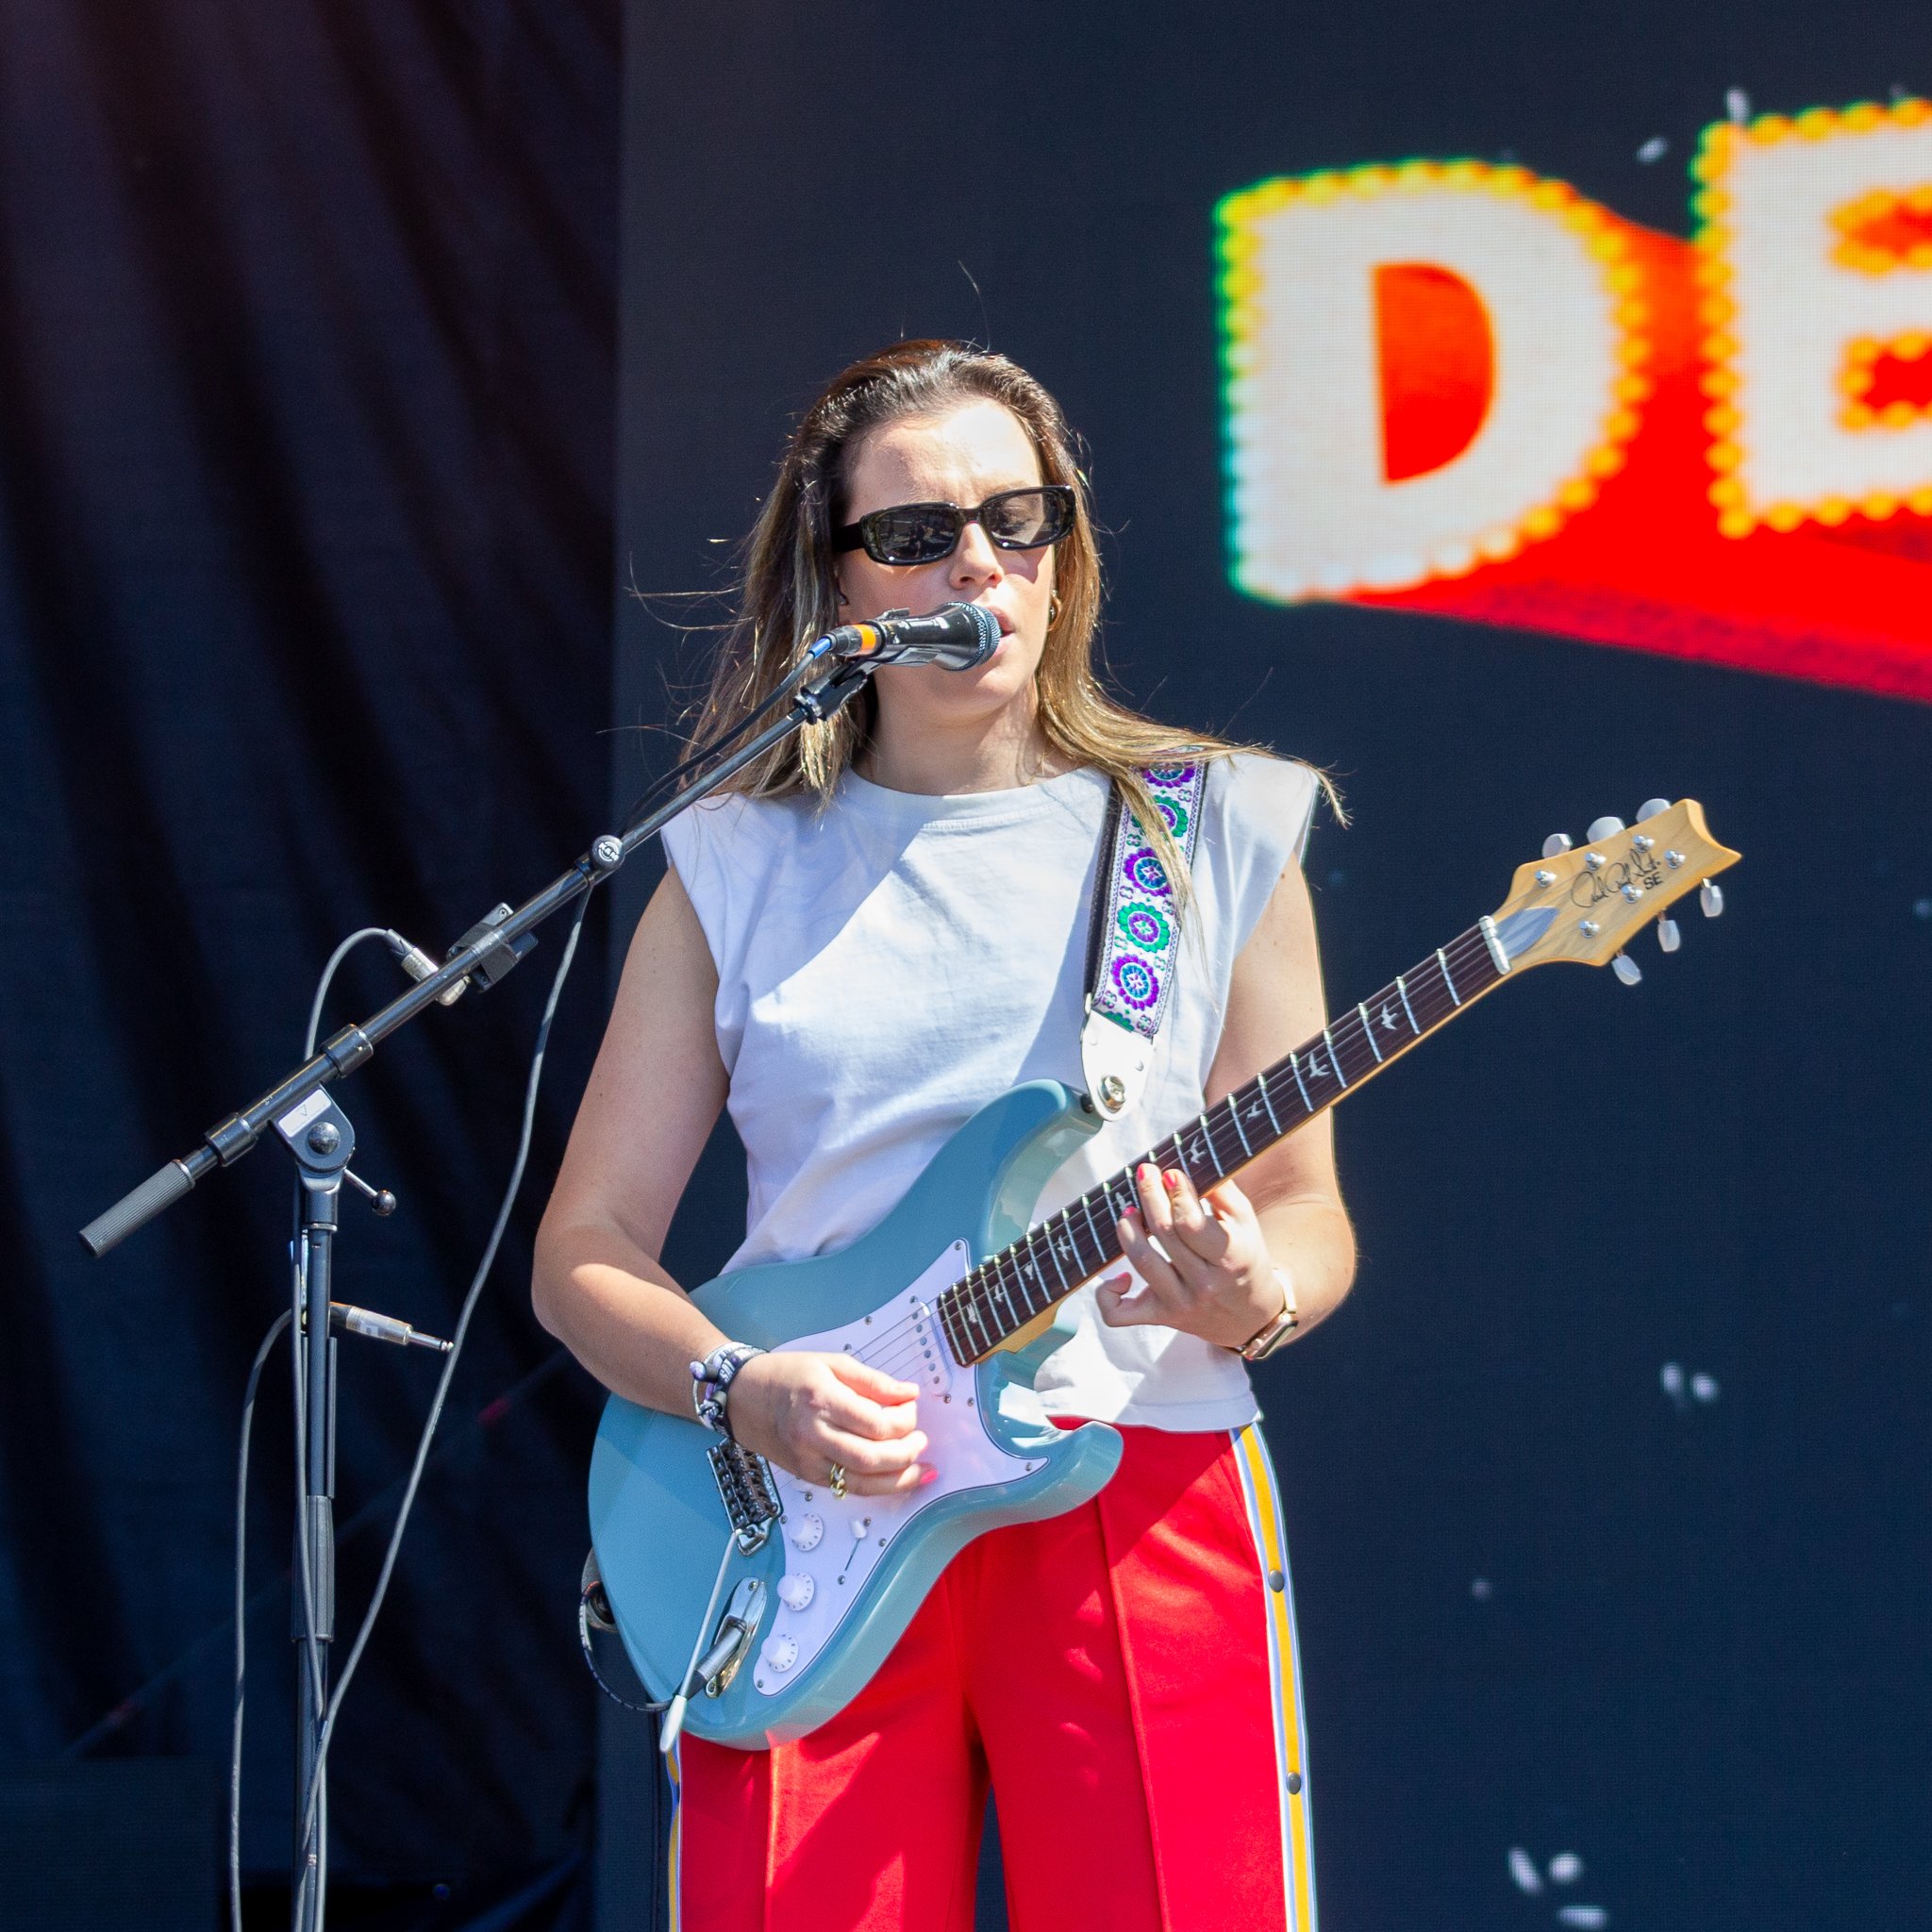  Isabel Torres plays guitar for Declan McKenna’s groovy song “Why Do You Feel So Down.” 